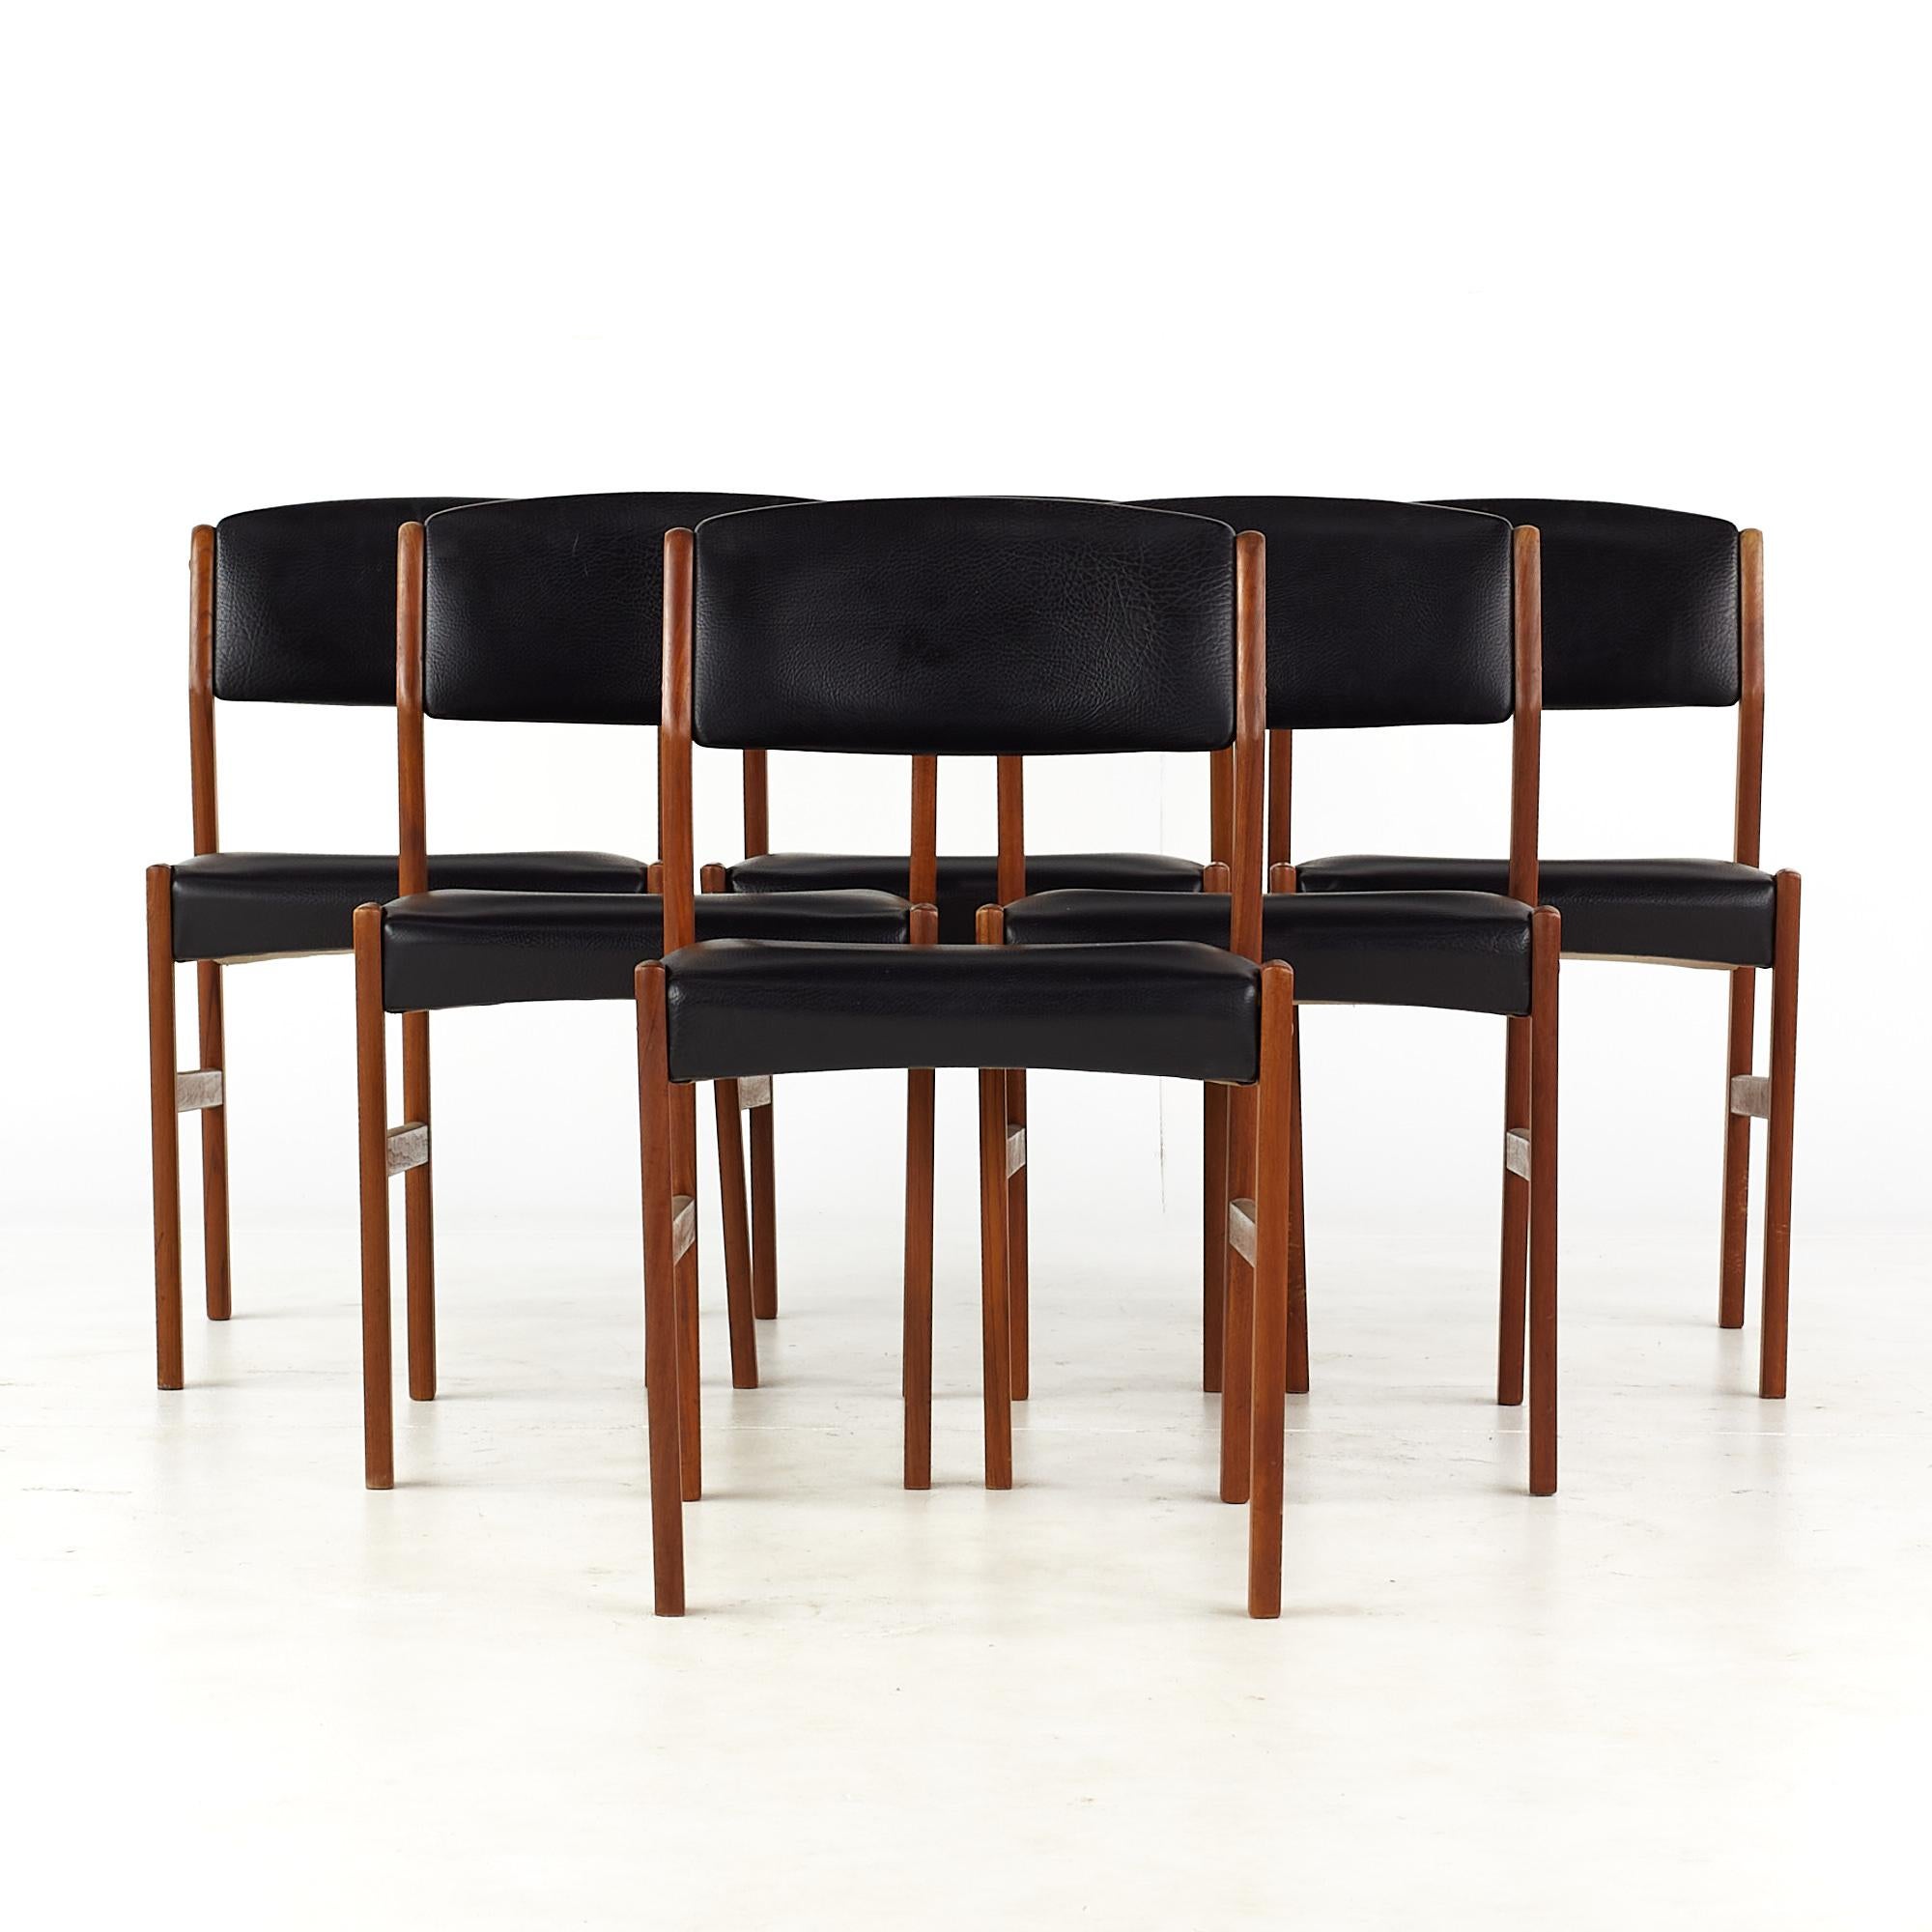 Erik Buch Style Mid Century teak dining chairs - Set of 6

Each chair measures: 17.75 wide x 19.5 deep x 30.5 inches high, with a seat height/chair clearance of 18 inches

All pieces of furniture can be had in what we call restored vintage